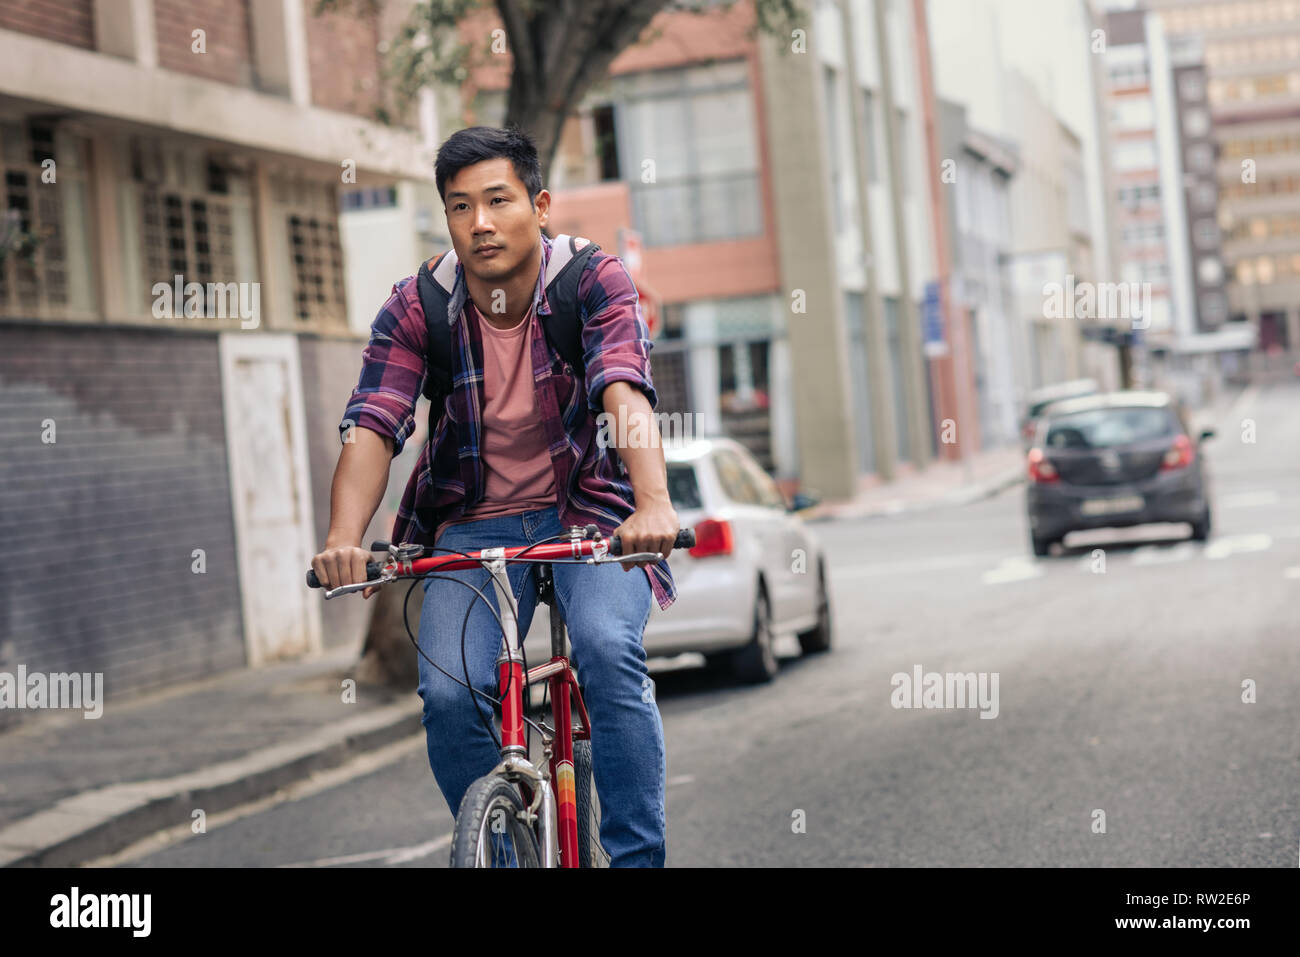 Young Asian man riding his bike through city streets Stock Photo